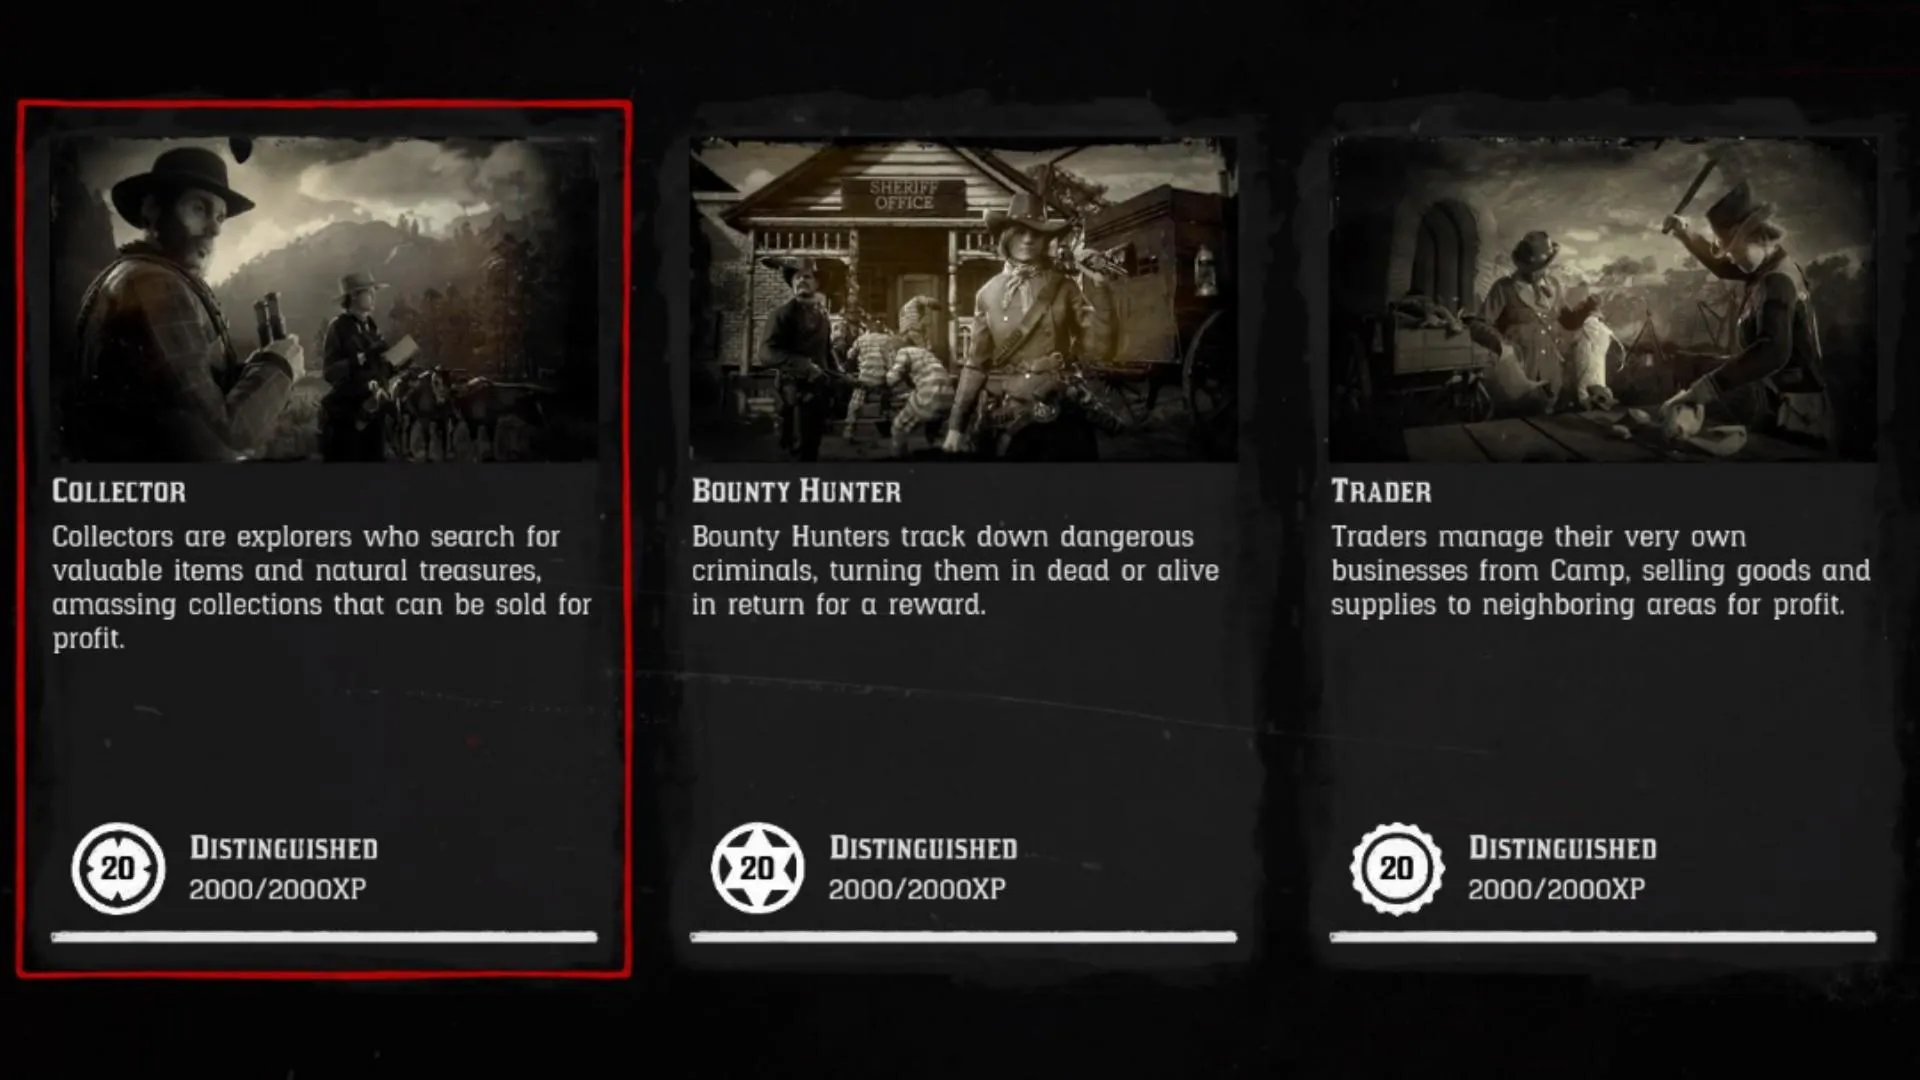 Red Dead Online: How to Easily Reach Rank 20 in the Collector Role and more (Thanks to the Community)